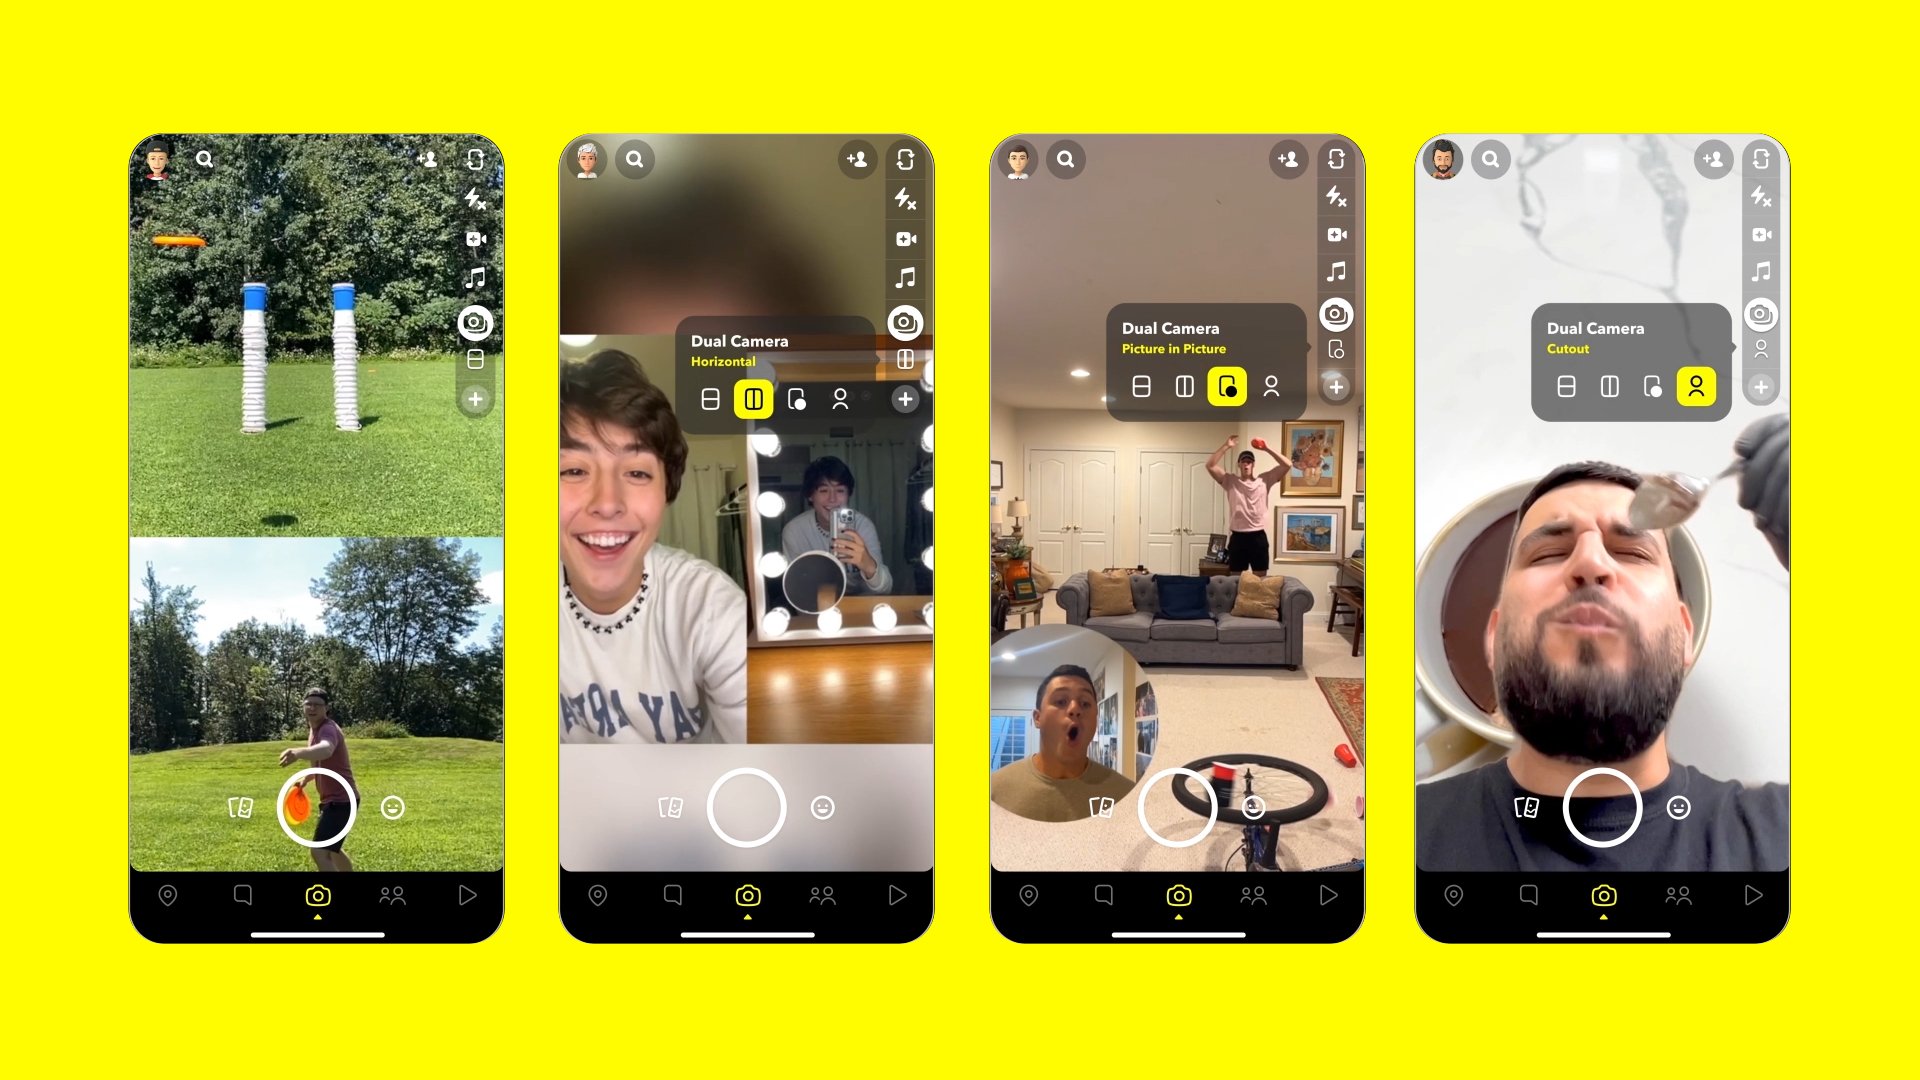 Snapchat Adds New Dual Camera Feature to Record Multiple Perspectives